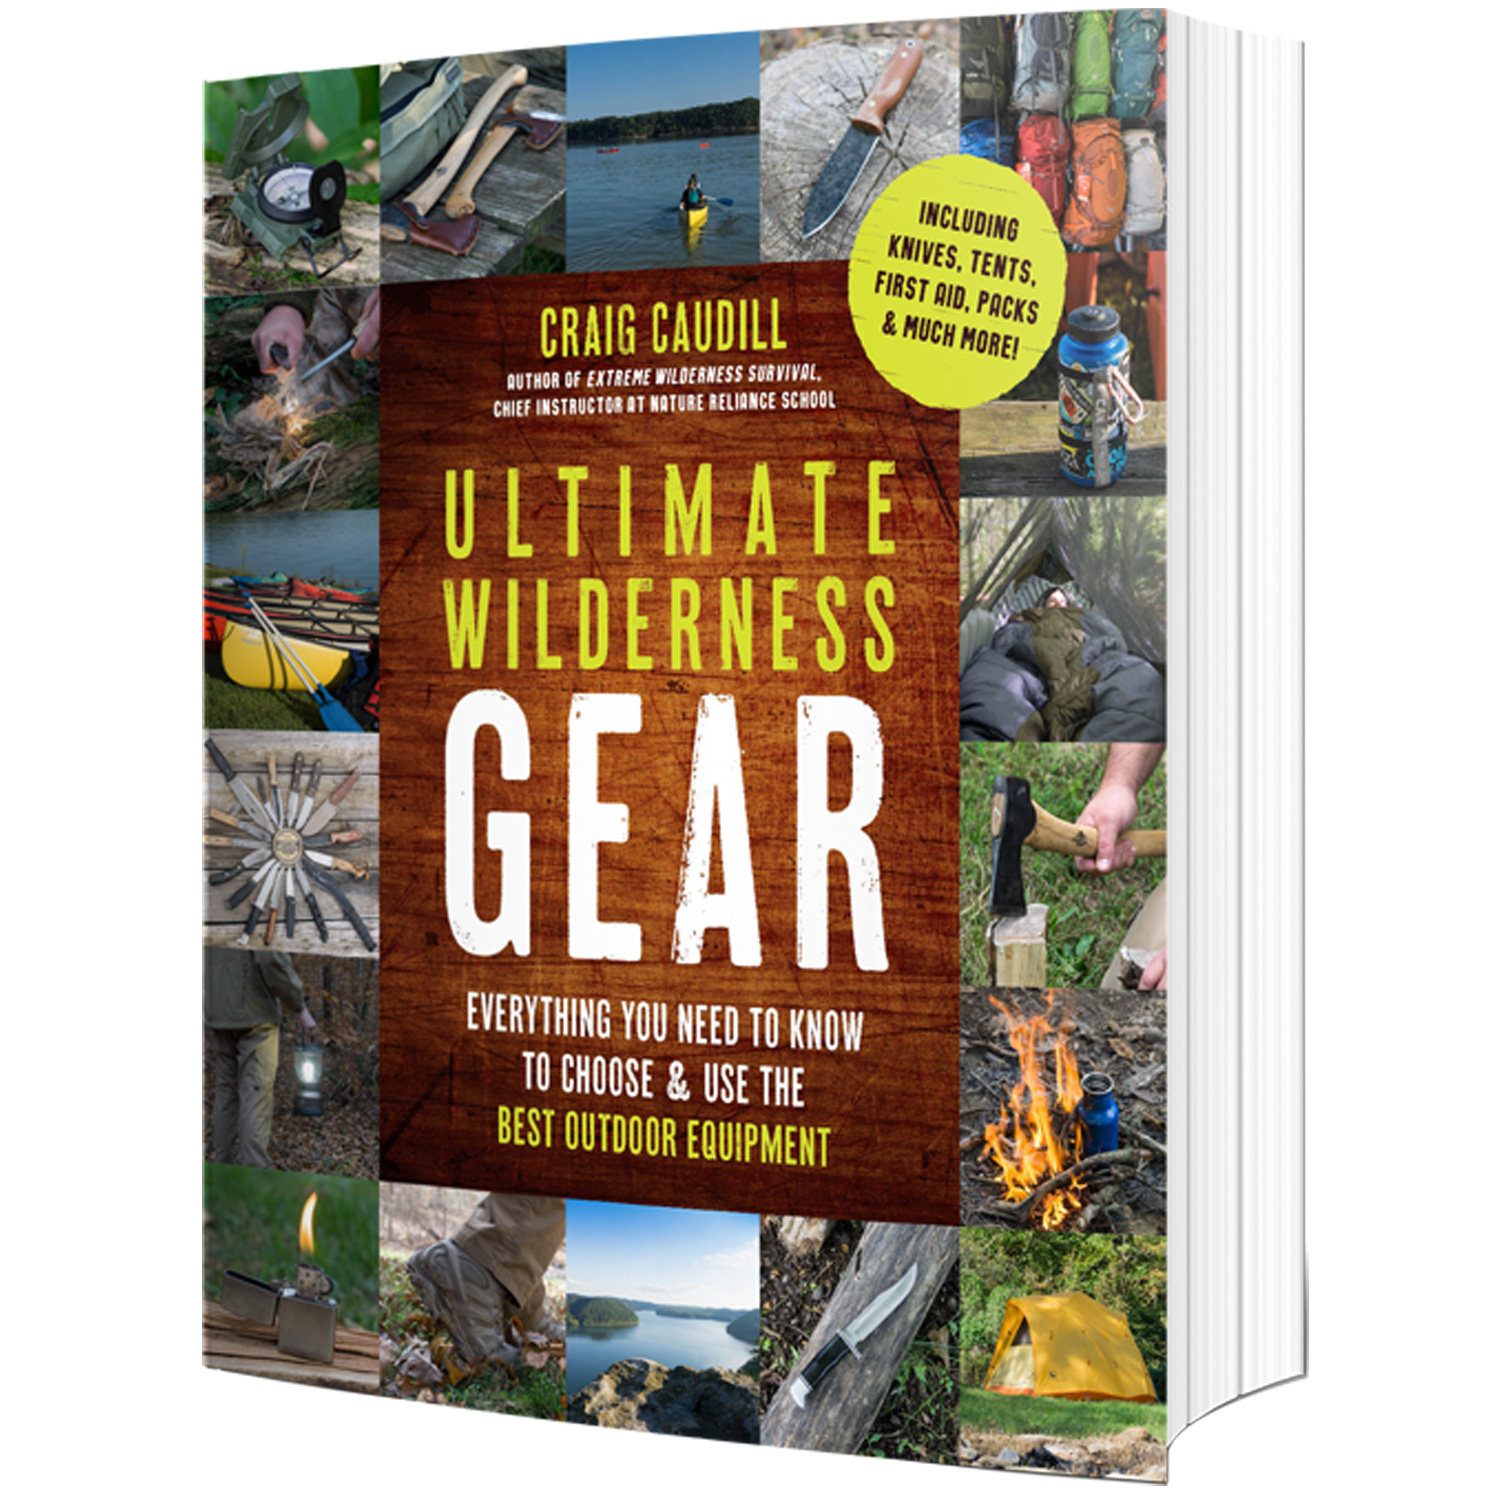 Ultimate Wilderness Gear: Everything You Need to Know to Choose and Use the Best Outdoor Equipment